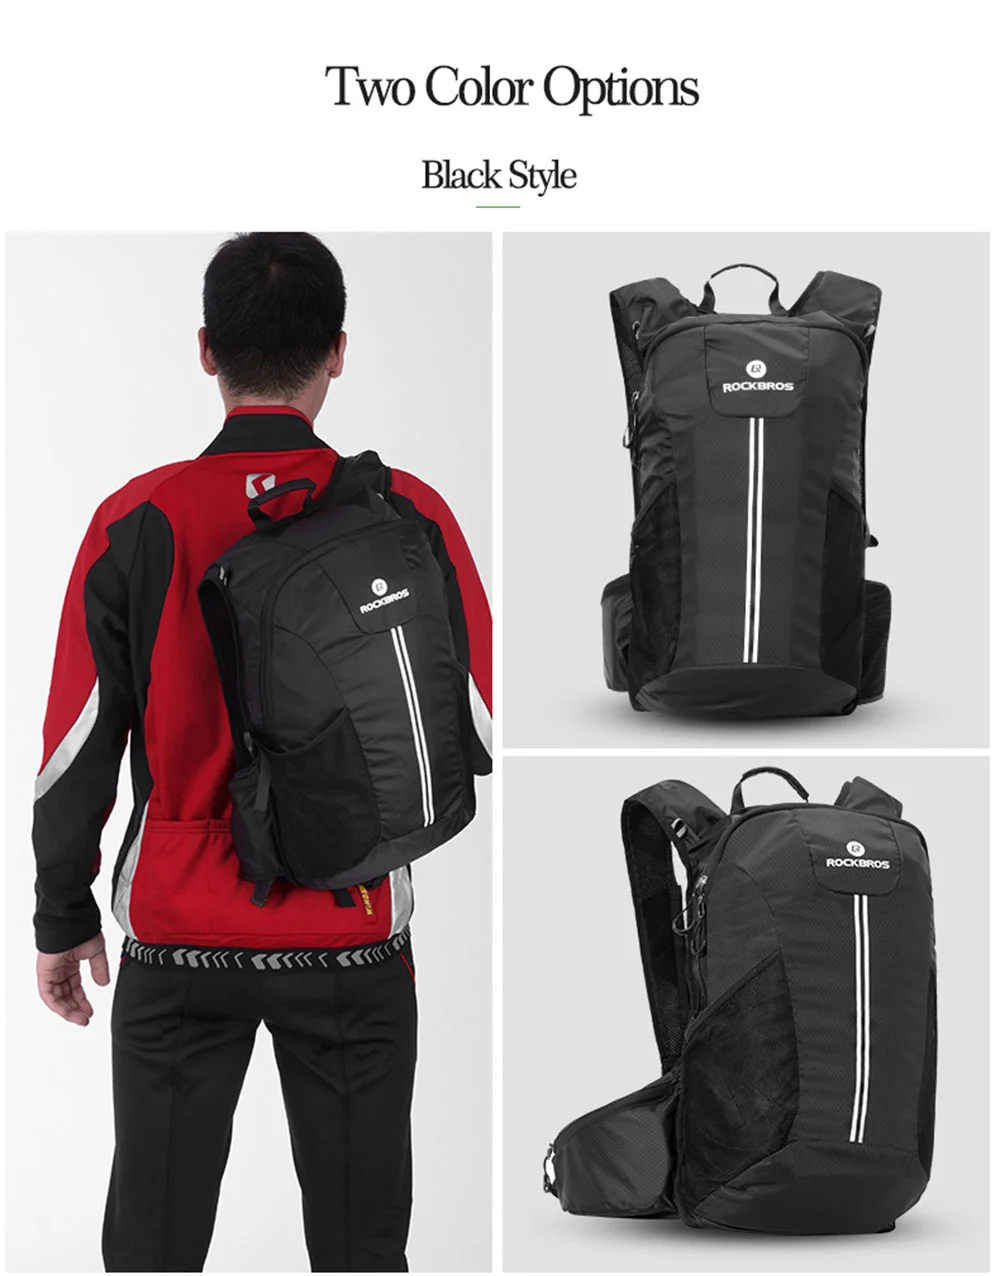 Rockbros High-Quality Hot-Selling Outdoor Sports Cycling Hiking Camping Climbing Daily Training Backpack